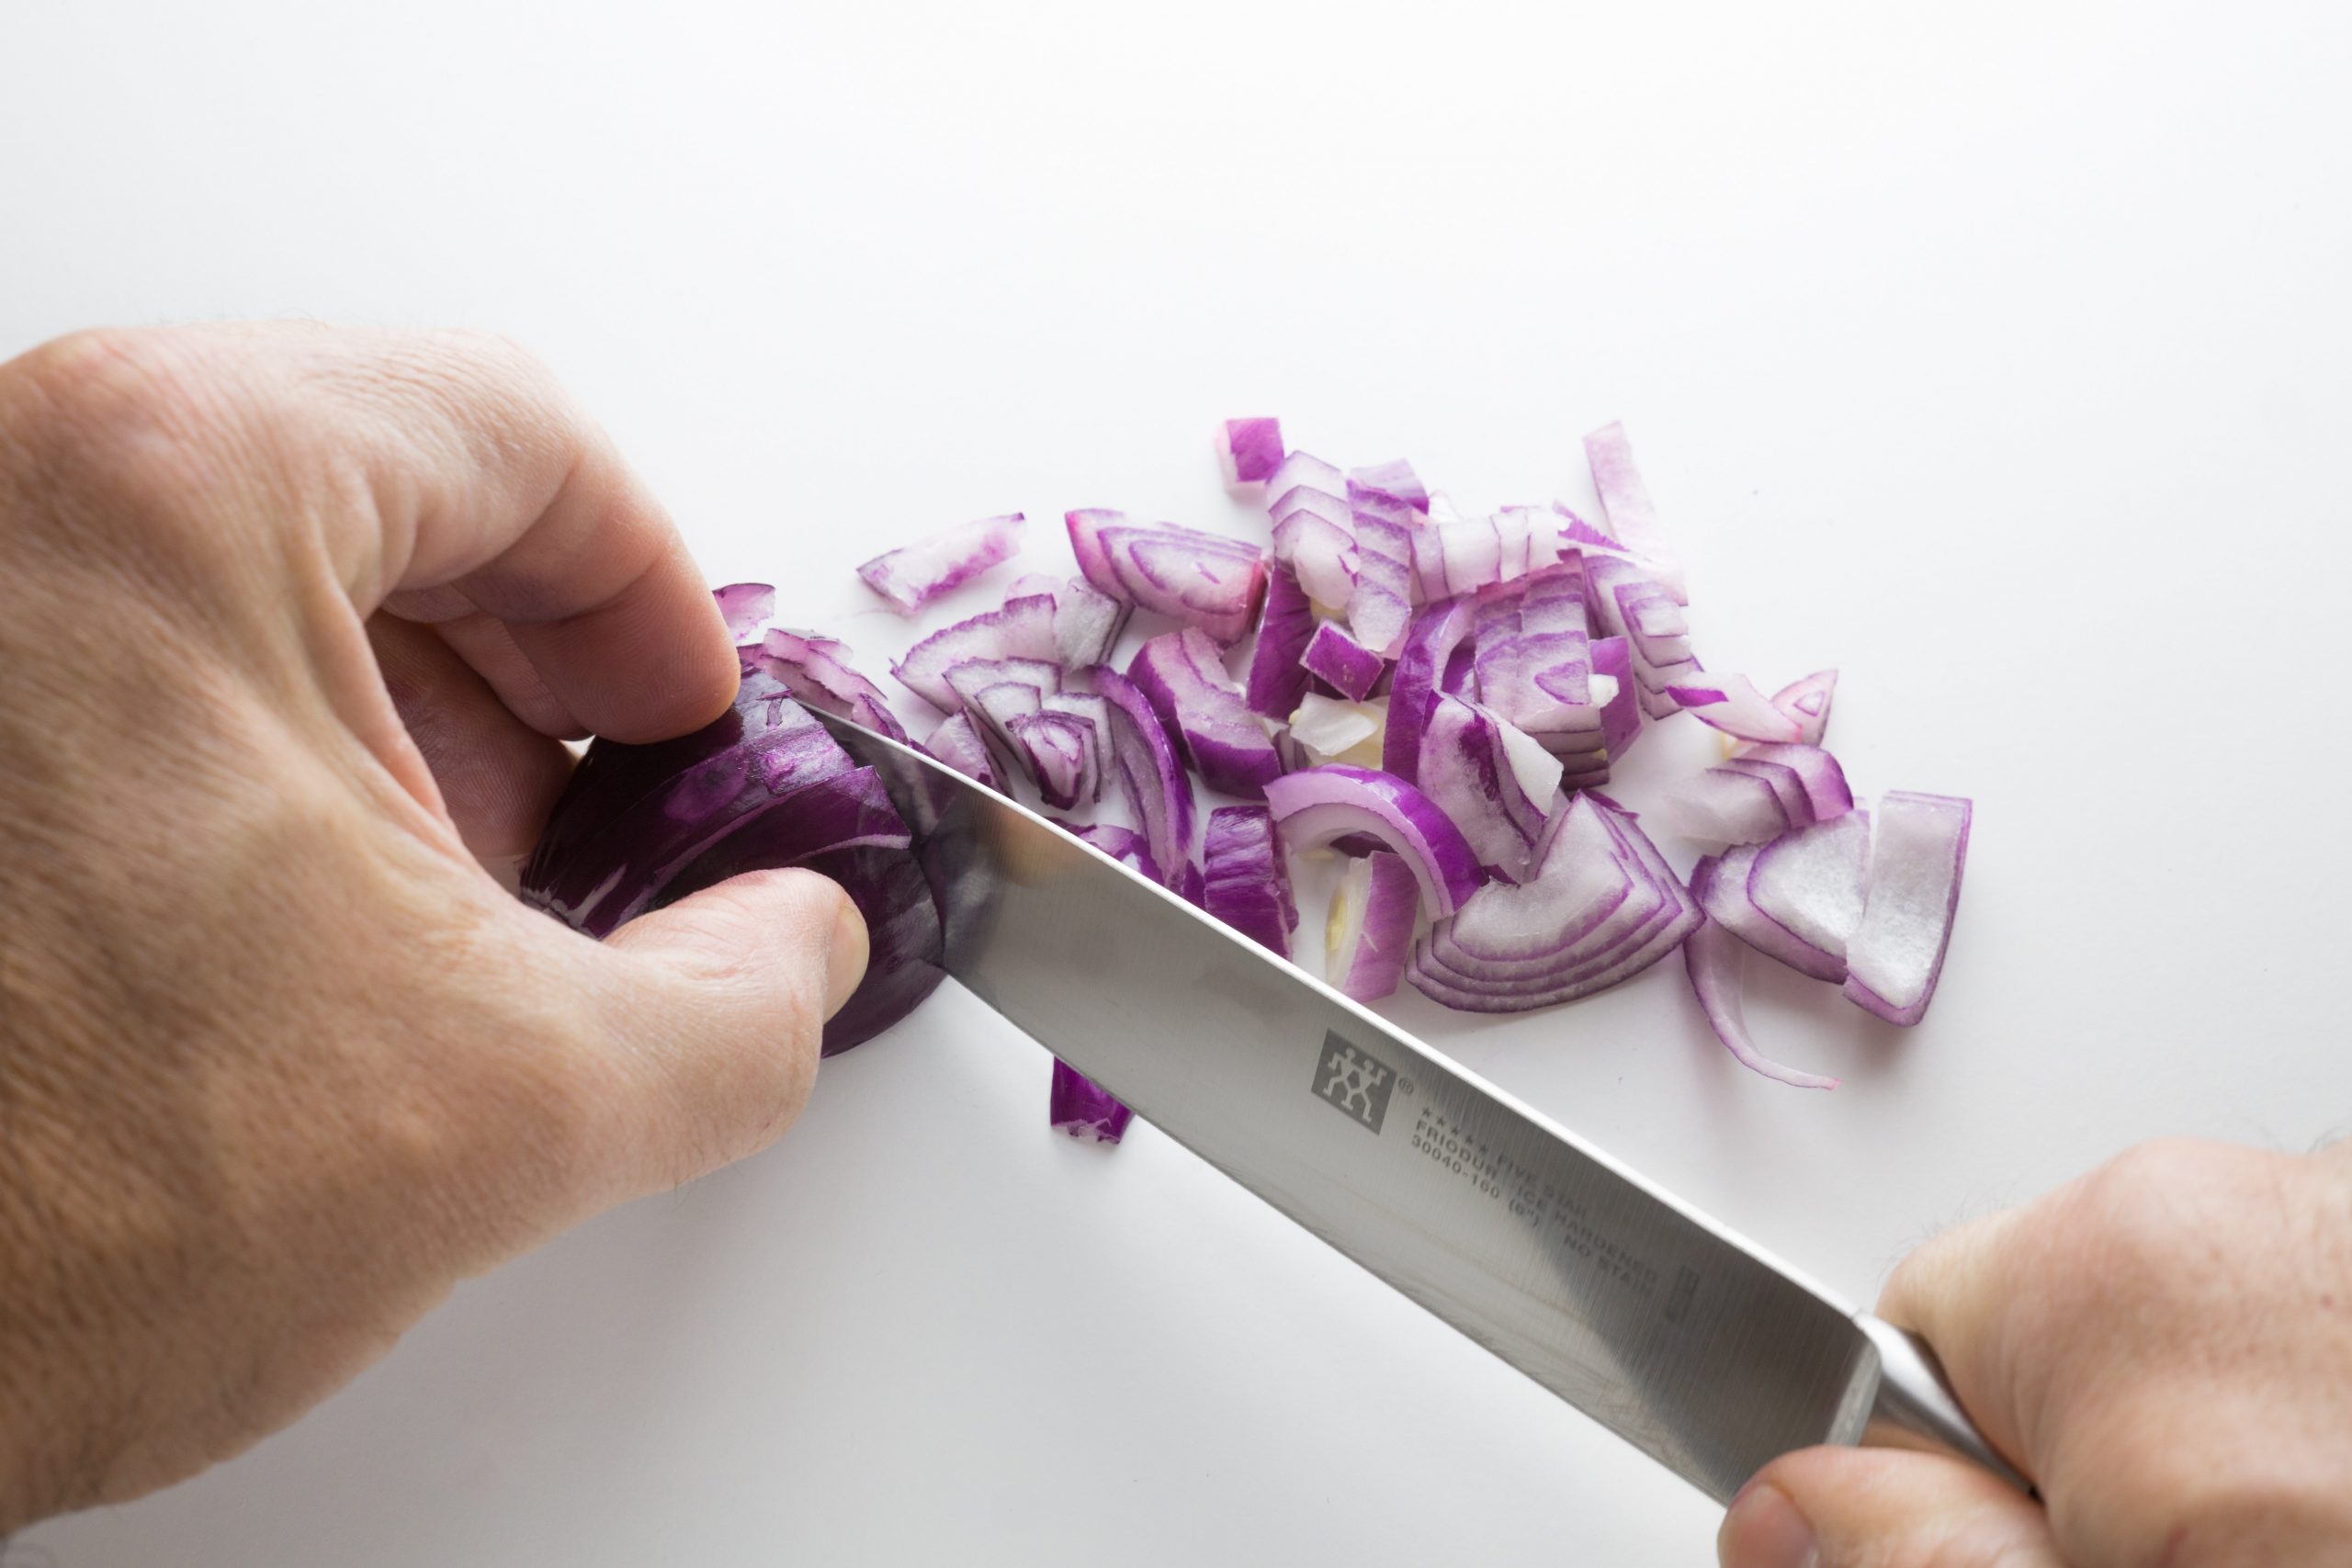 Hone your knives at home - CNET